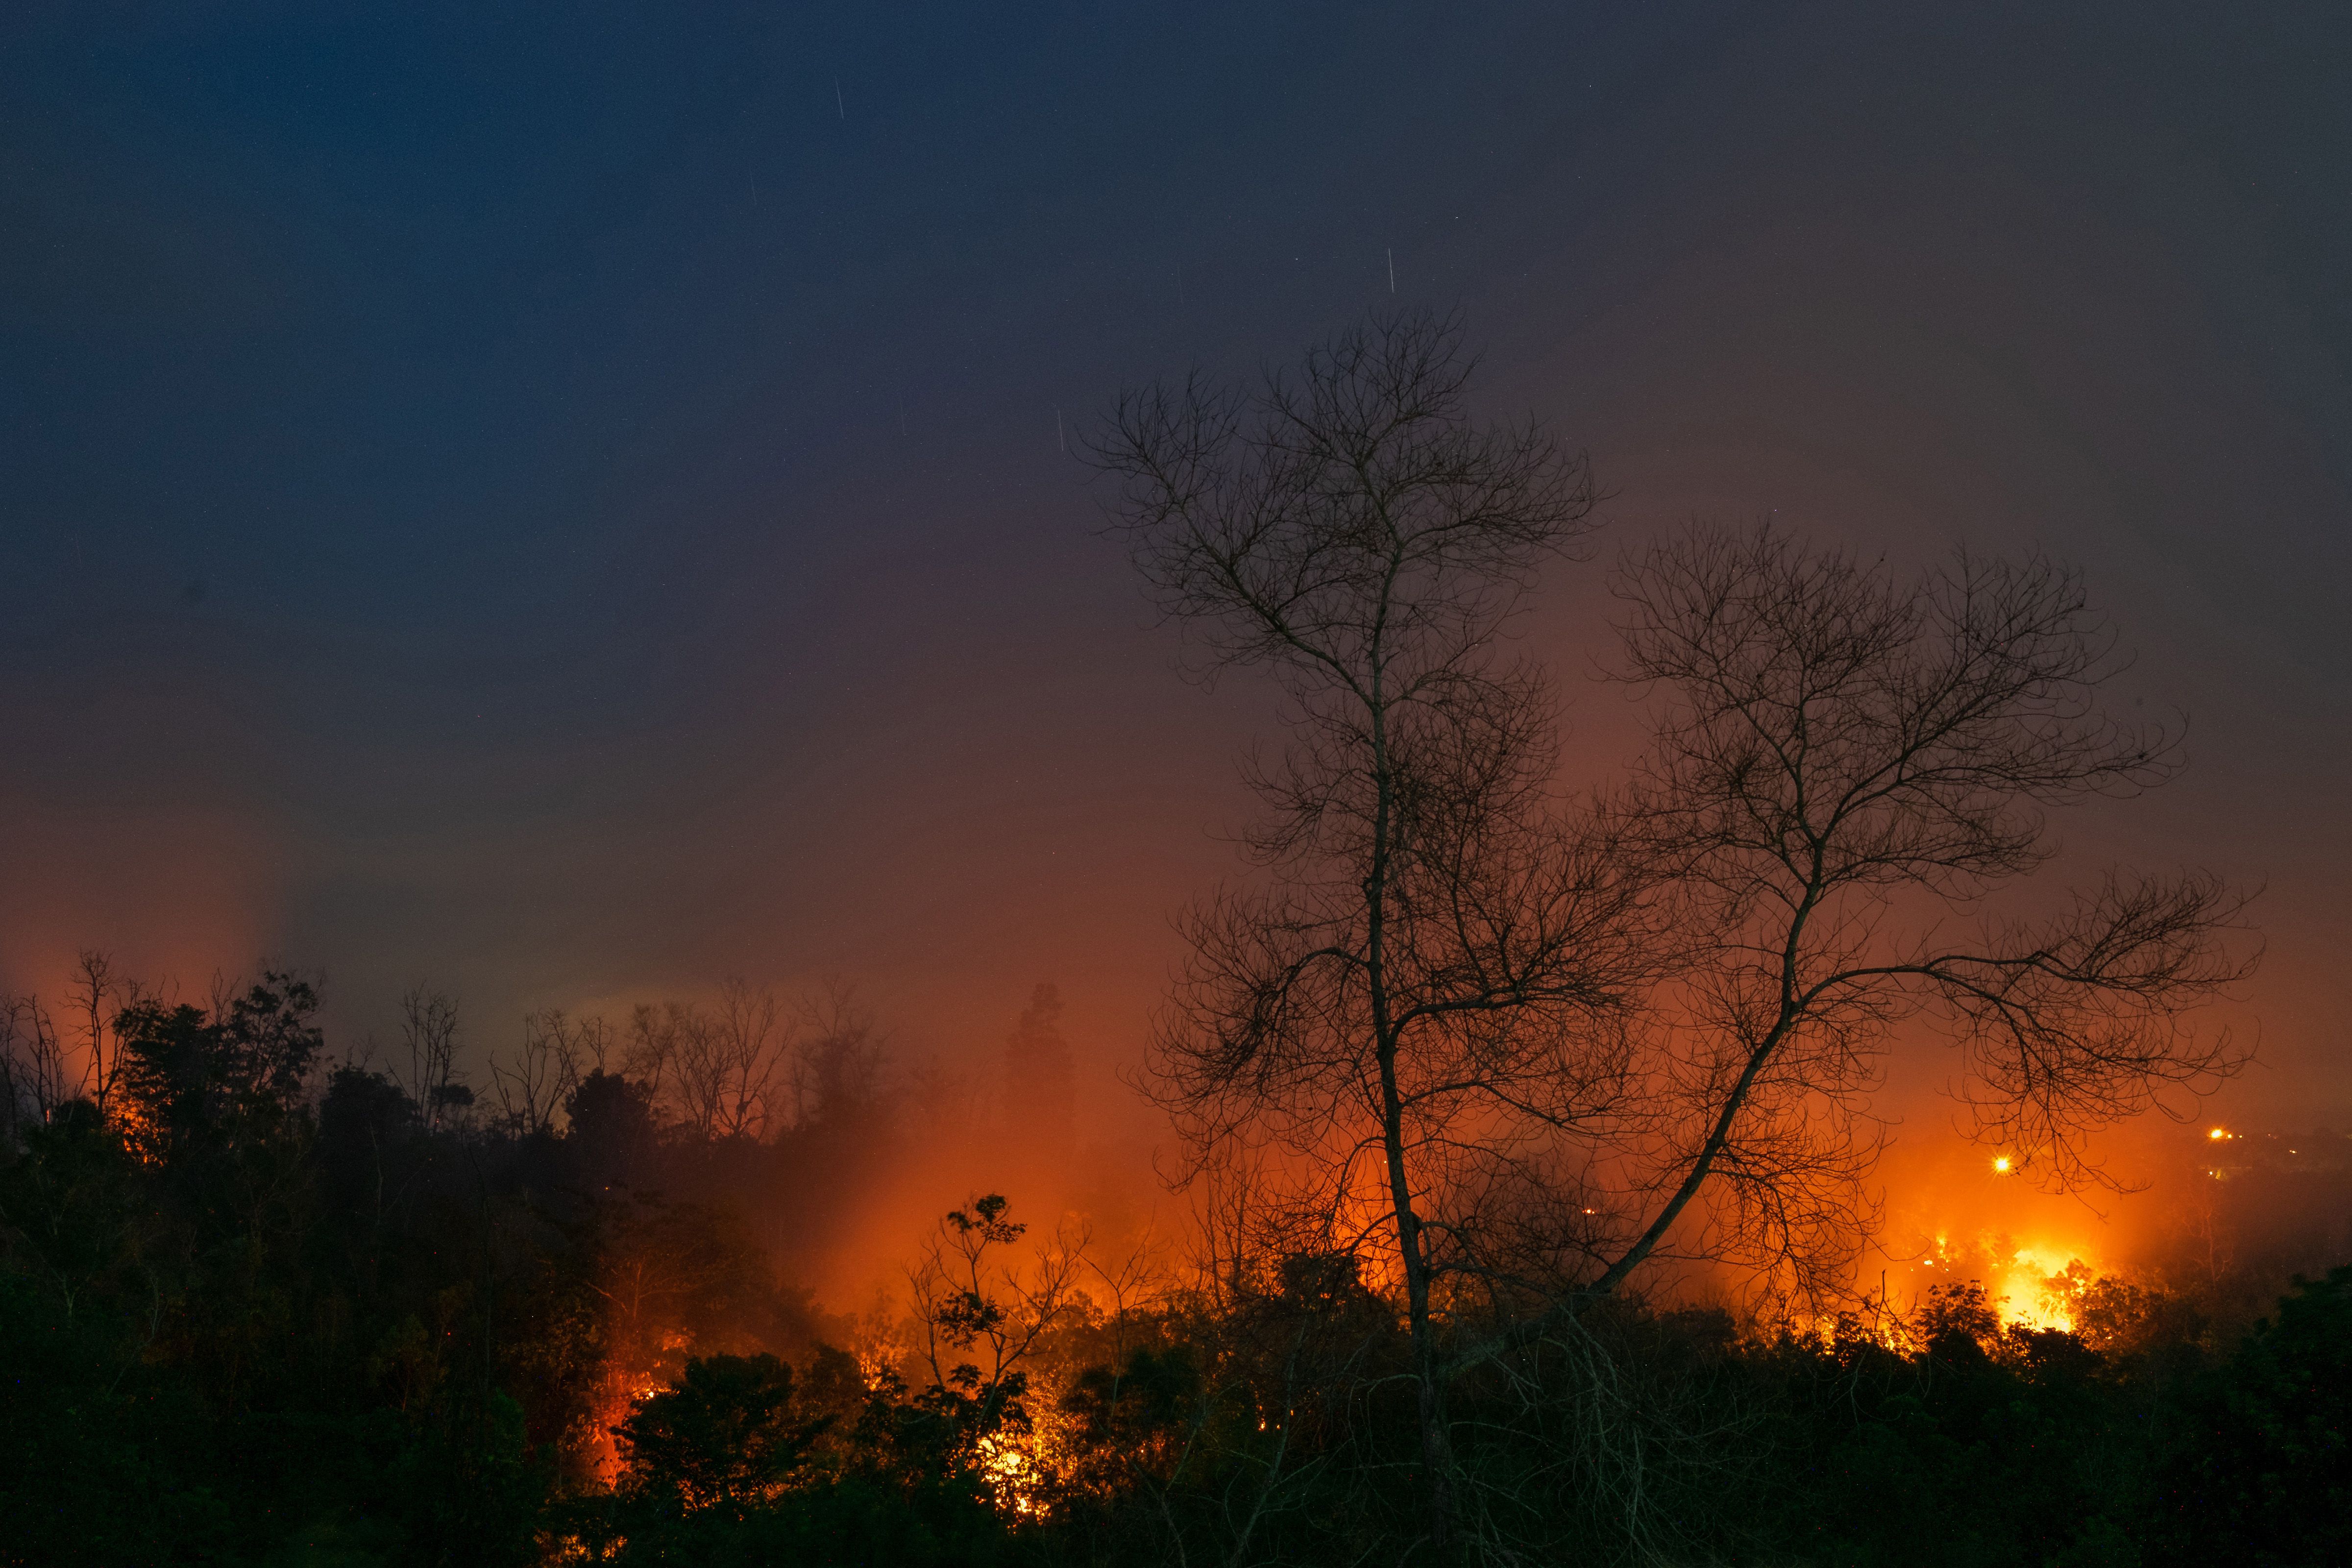 A long-exposure photograph shows a Forest fire at Rumbai Pesisir village in Riau Province, Indonesia 